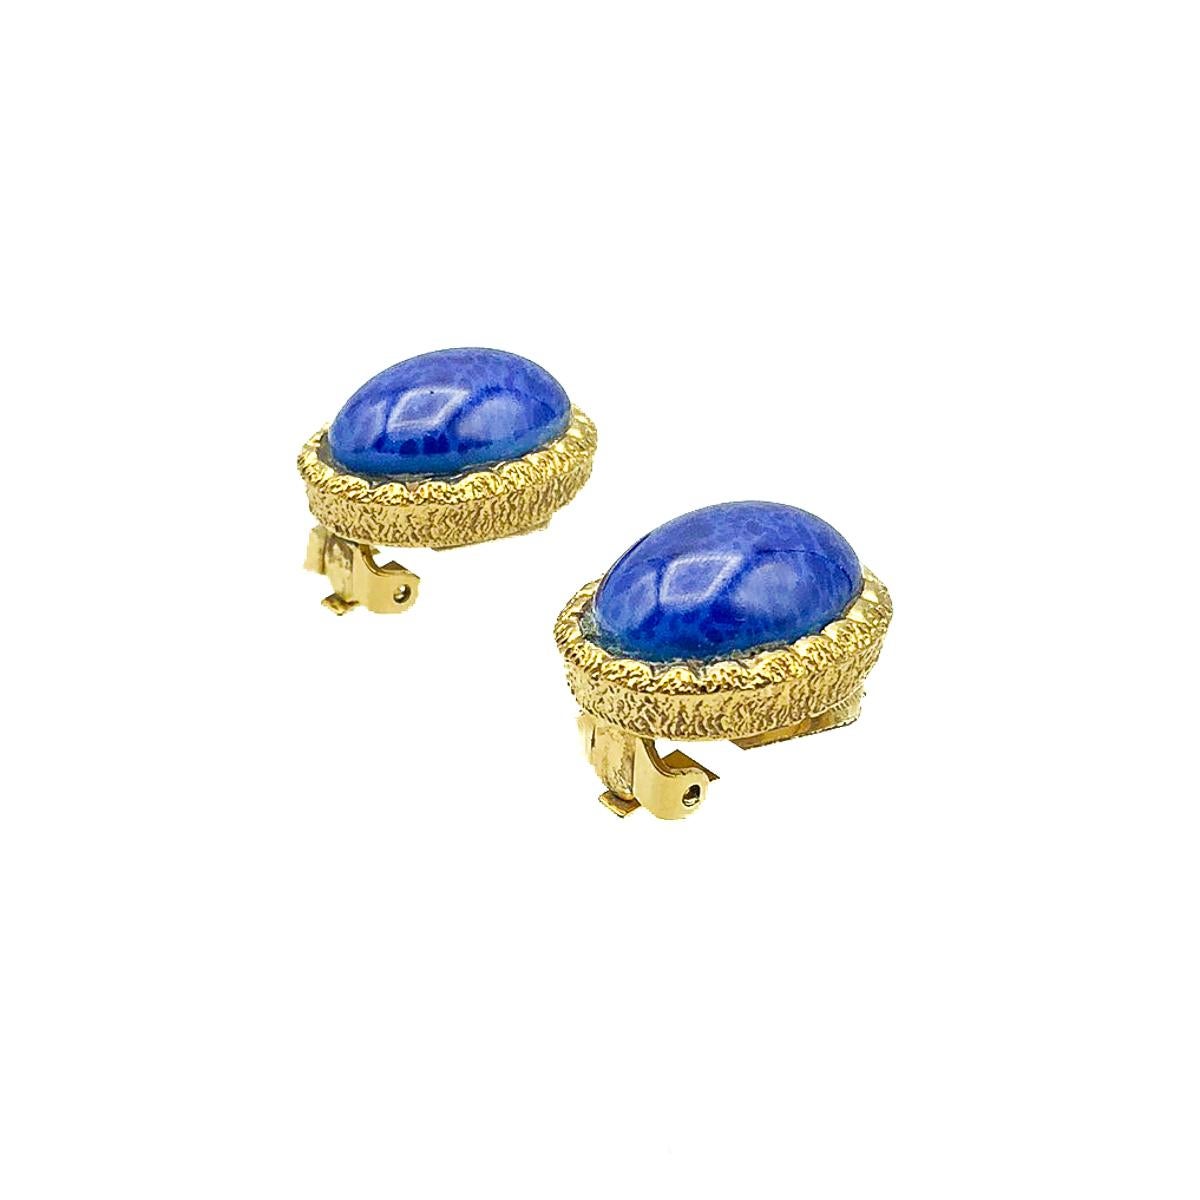 Vintage Dior Lapis Earrings. Crafted in gold plated metal with a large blue cabochon stone emulating lapis lazuli. Very good vintage condition, signed, 1.8cms. A perfectly timeless pair of earrings from the House of Dior. 

Established in 2016, this